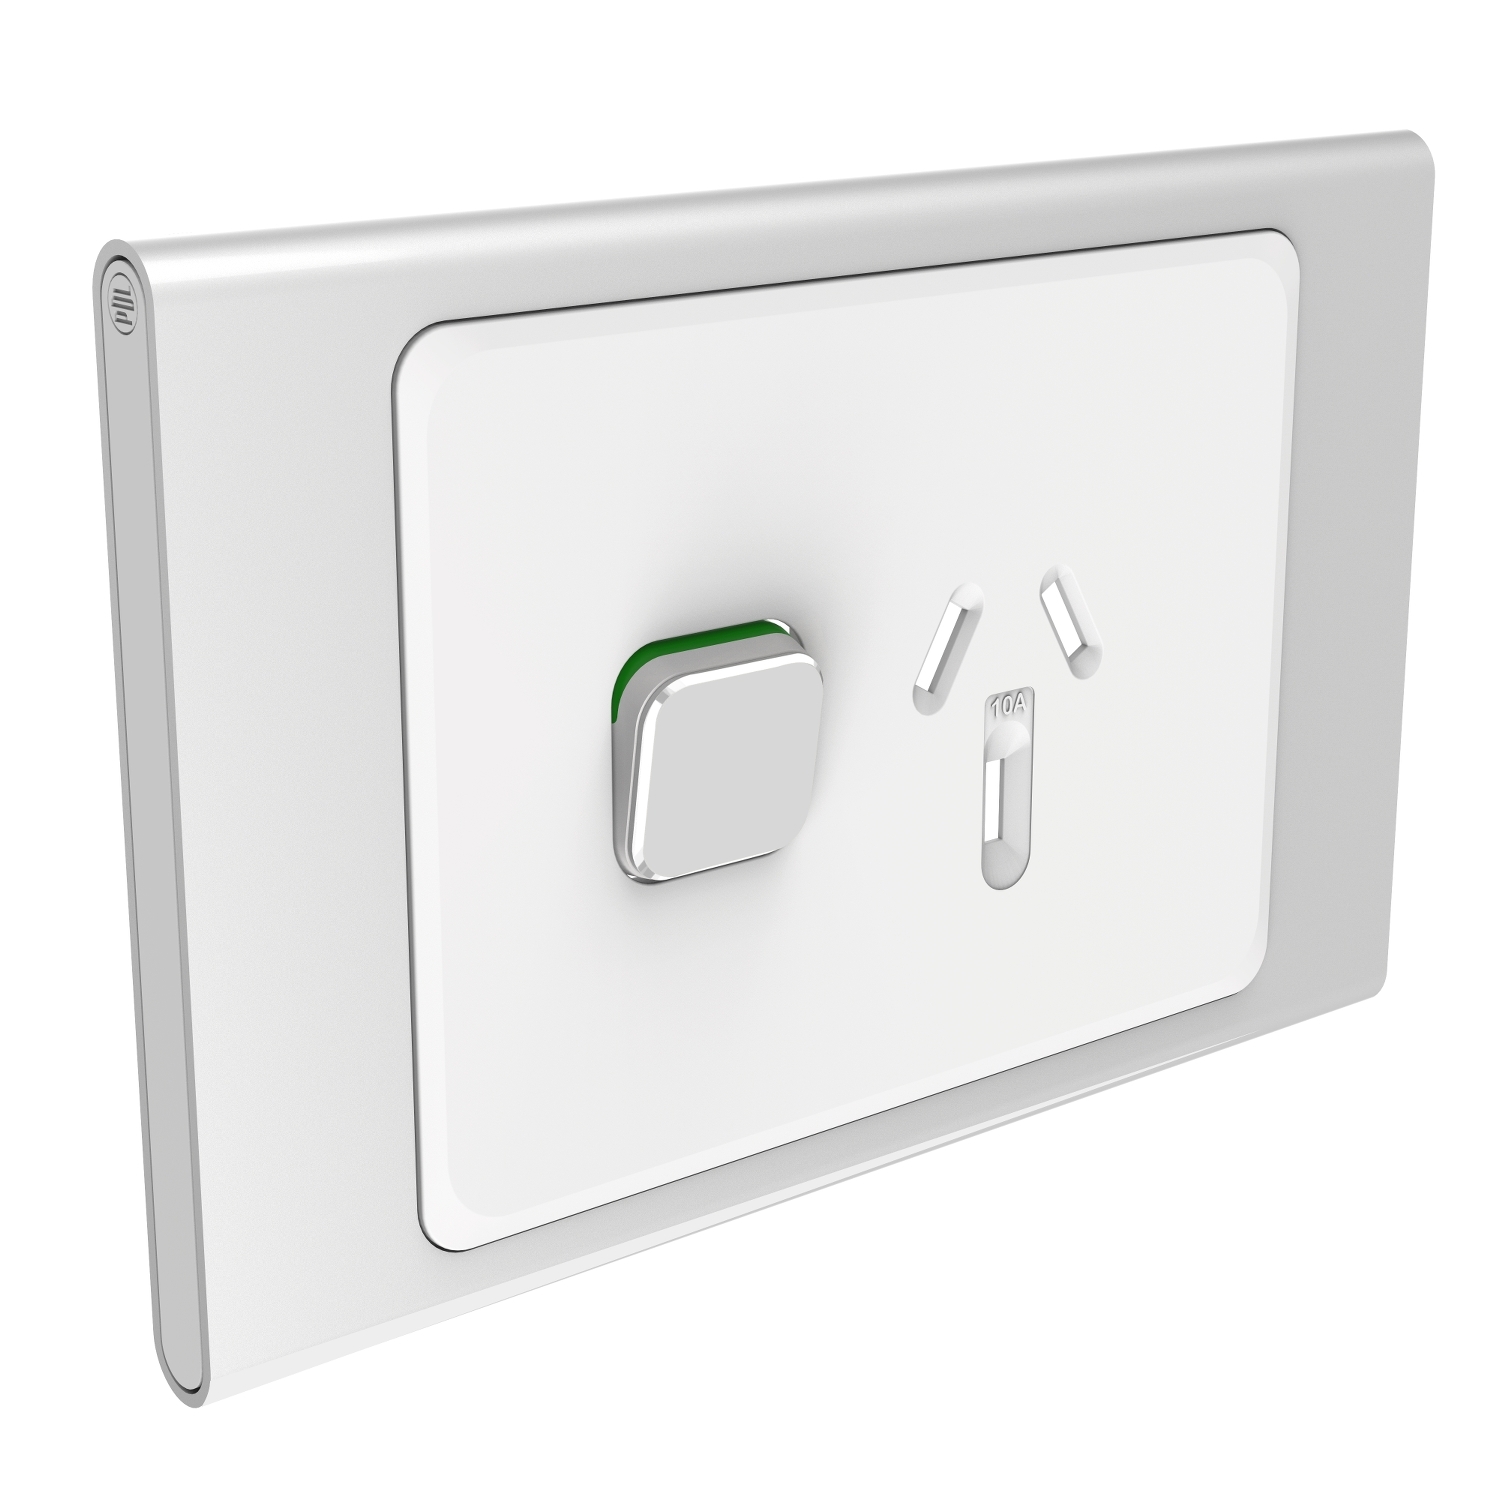 PDL Iconic STYL, cover frame, 1 switch & 1 socket, horizontal - Silver